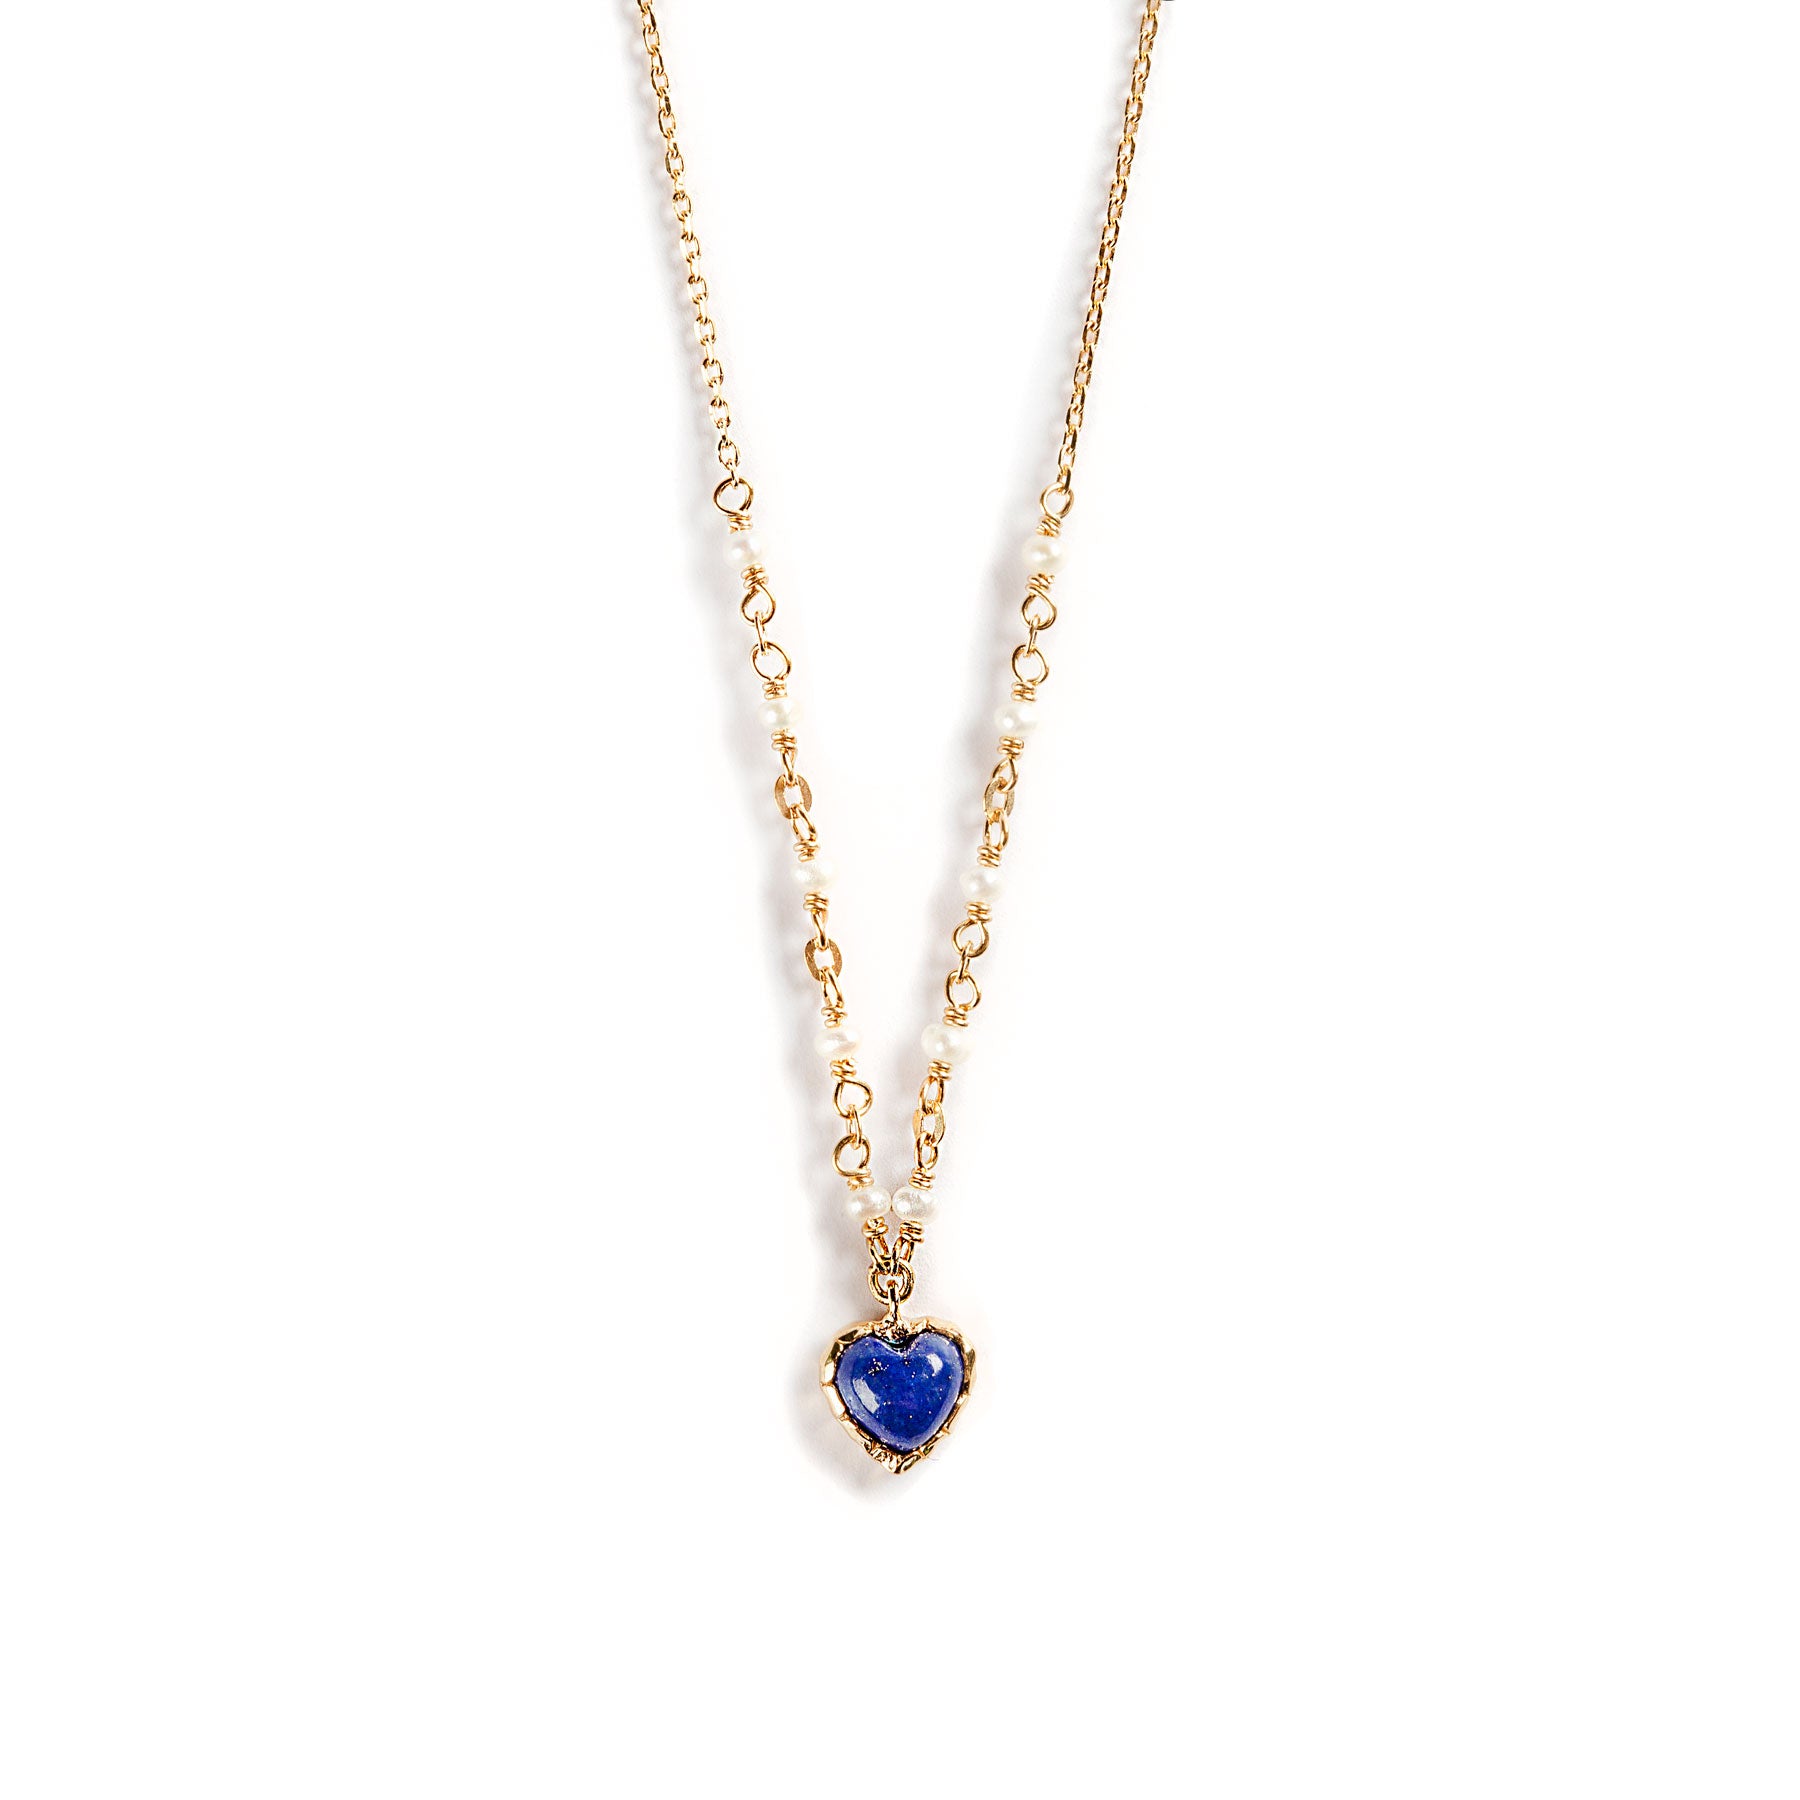 HEART LAPISLAZULI NECKLACE SET IN 925 SILVER GOLD PLATED